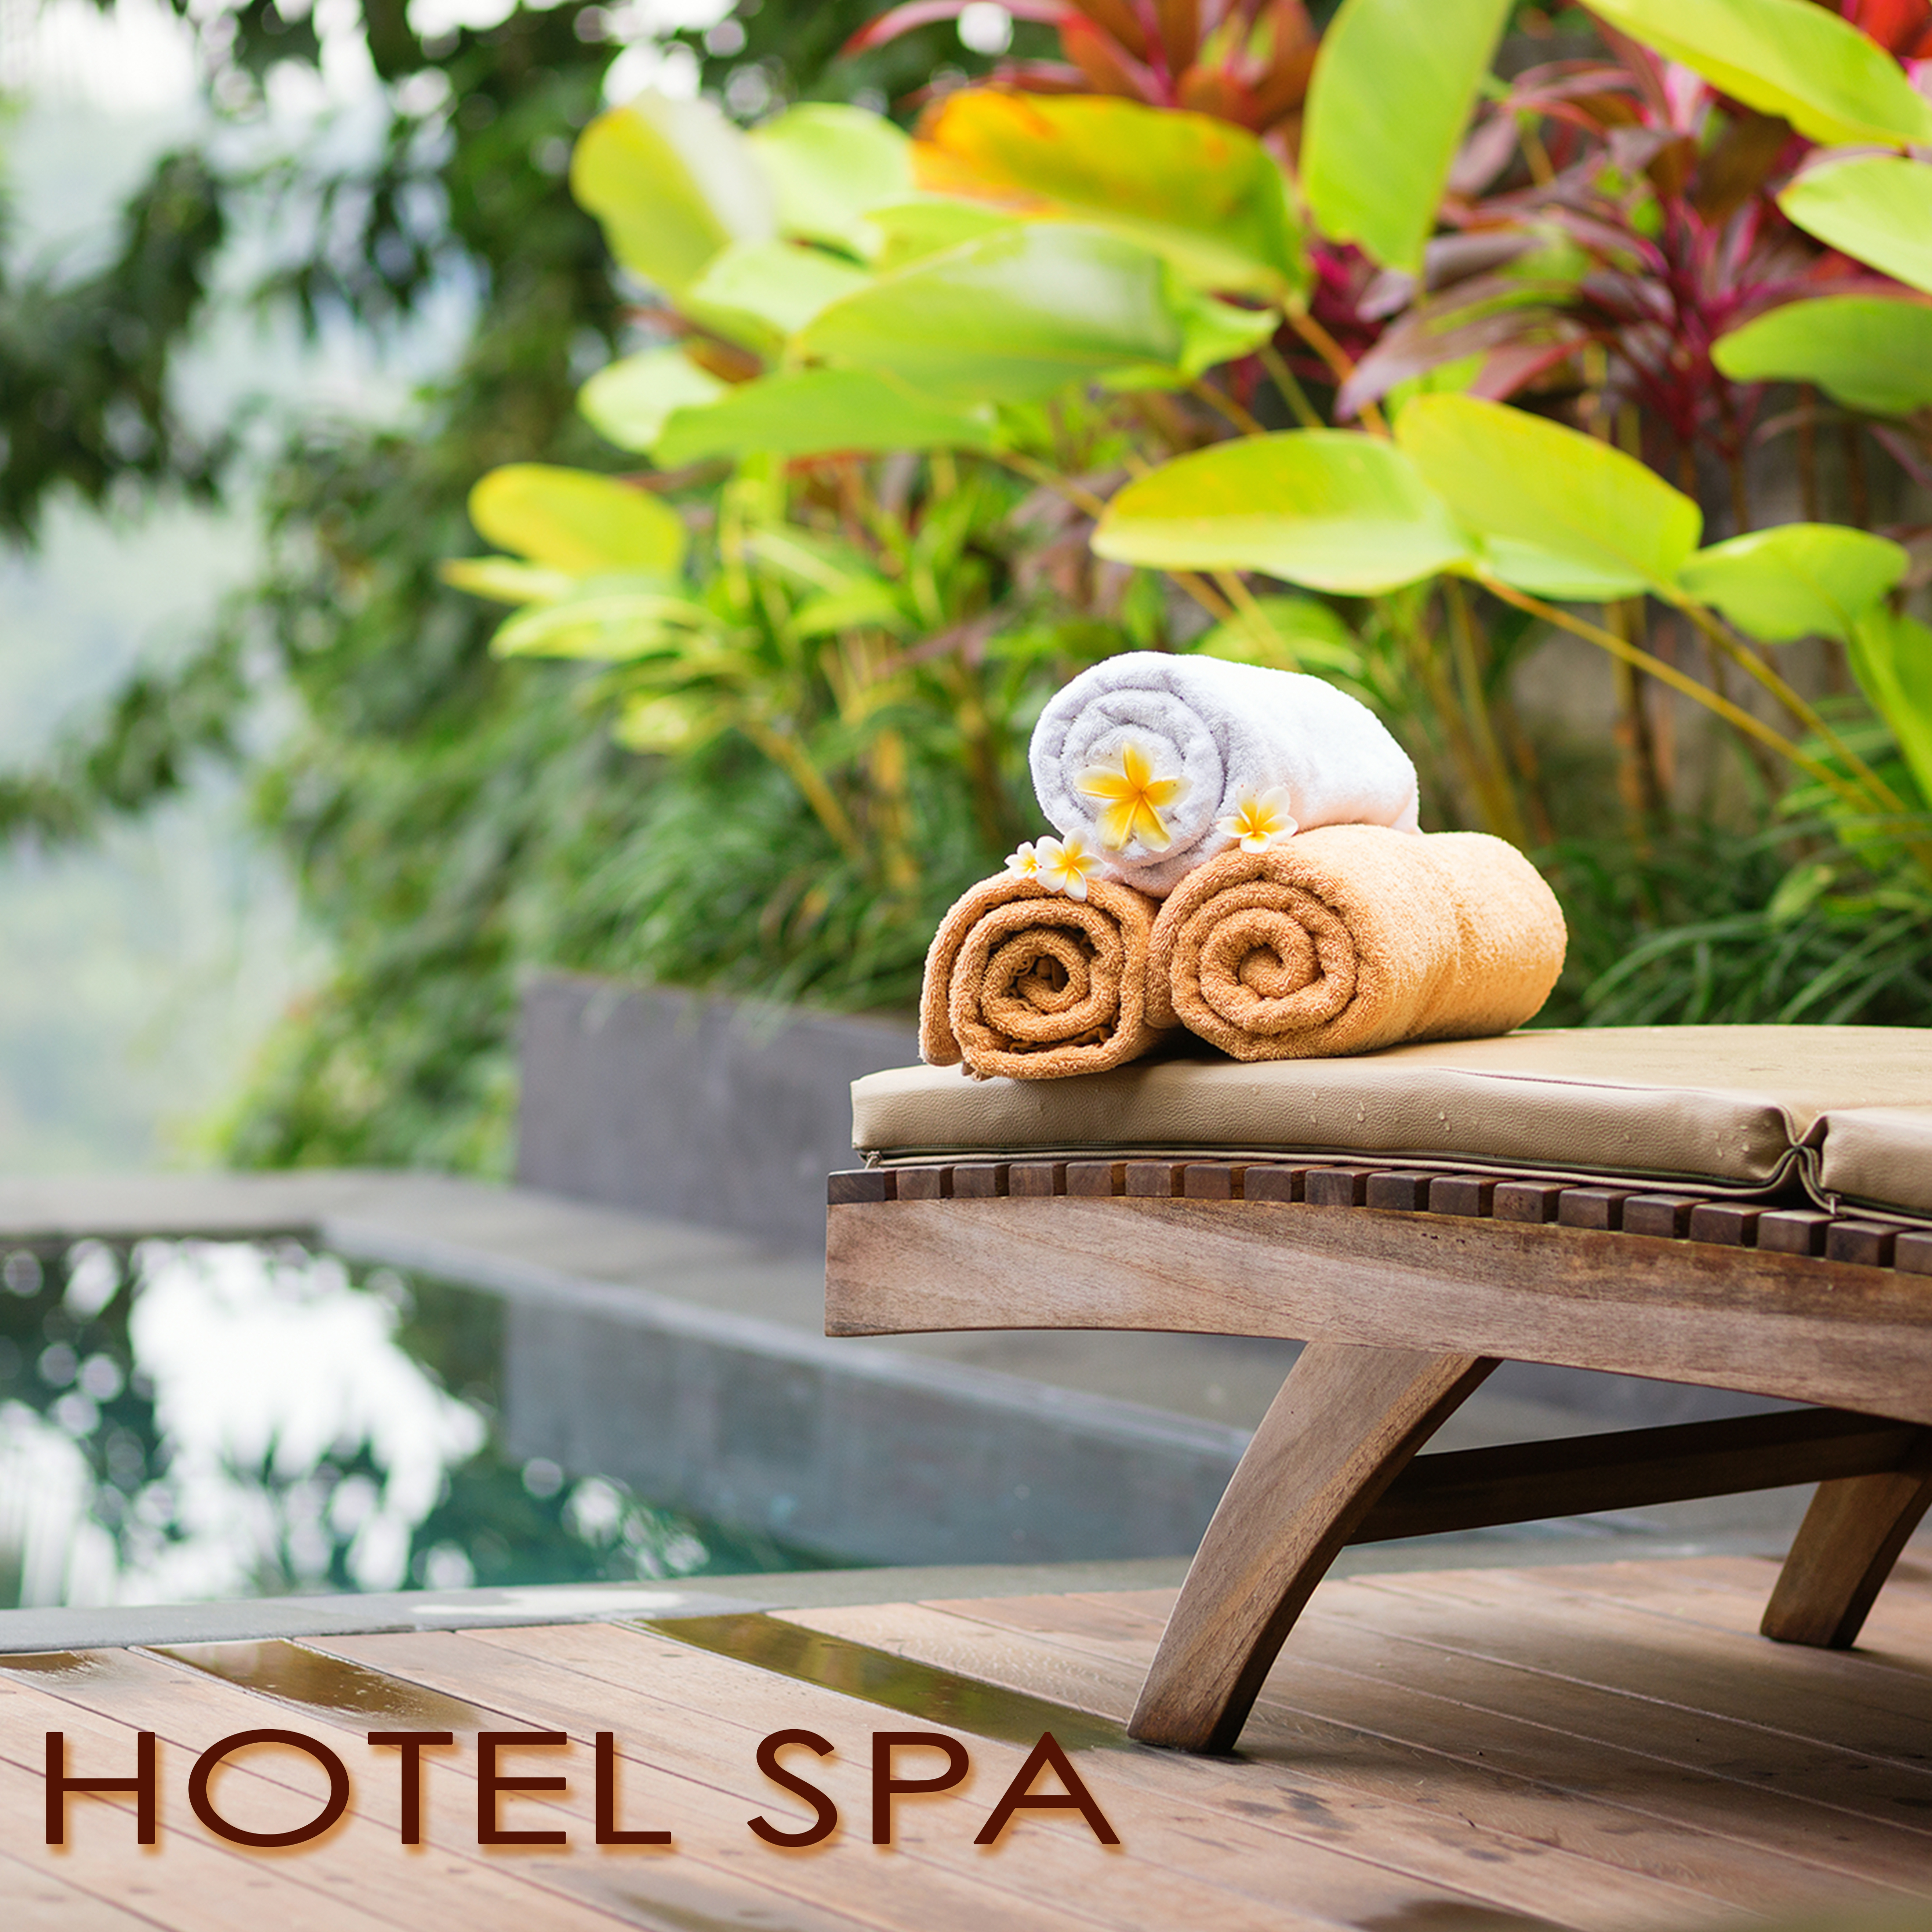 Hotel Spa – Soothing Spa Music for Massage, Spa Treatments, Sauna & Beauty Treatments in Wellness Center